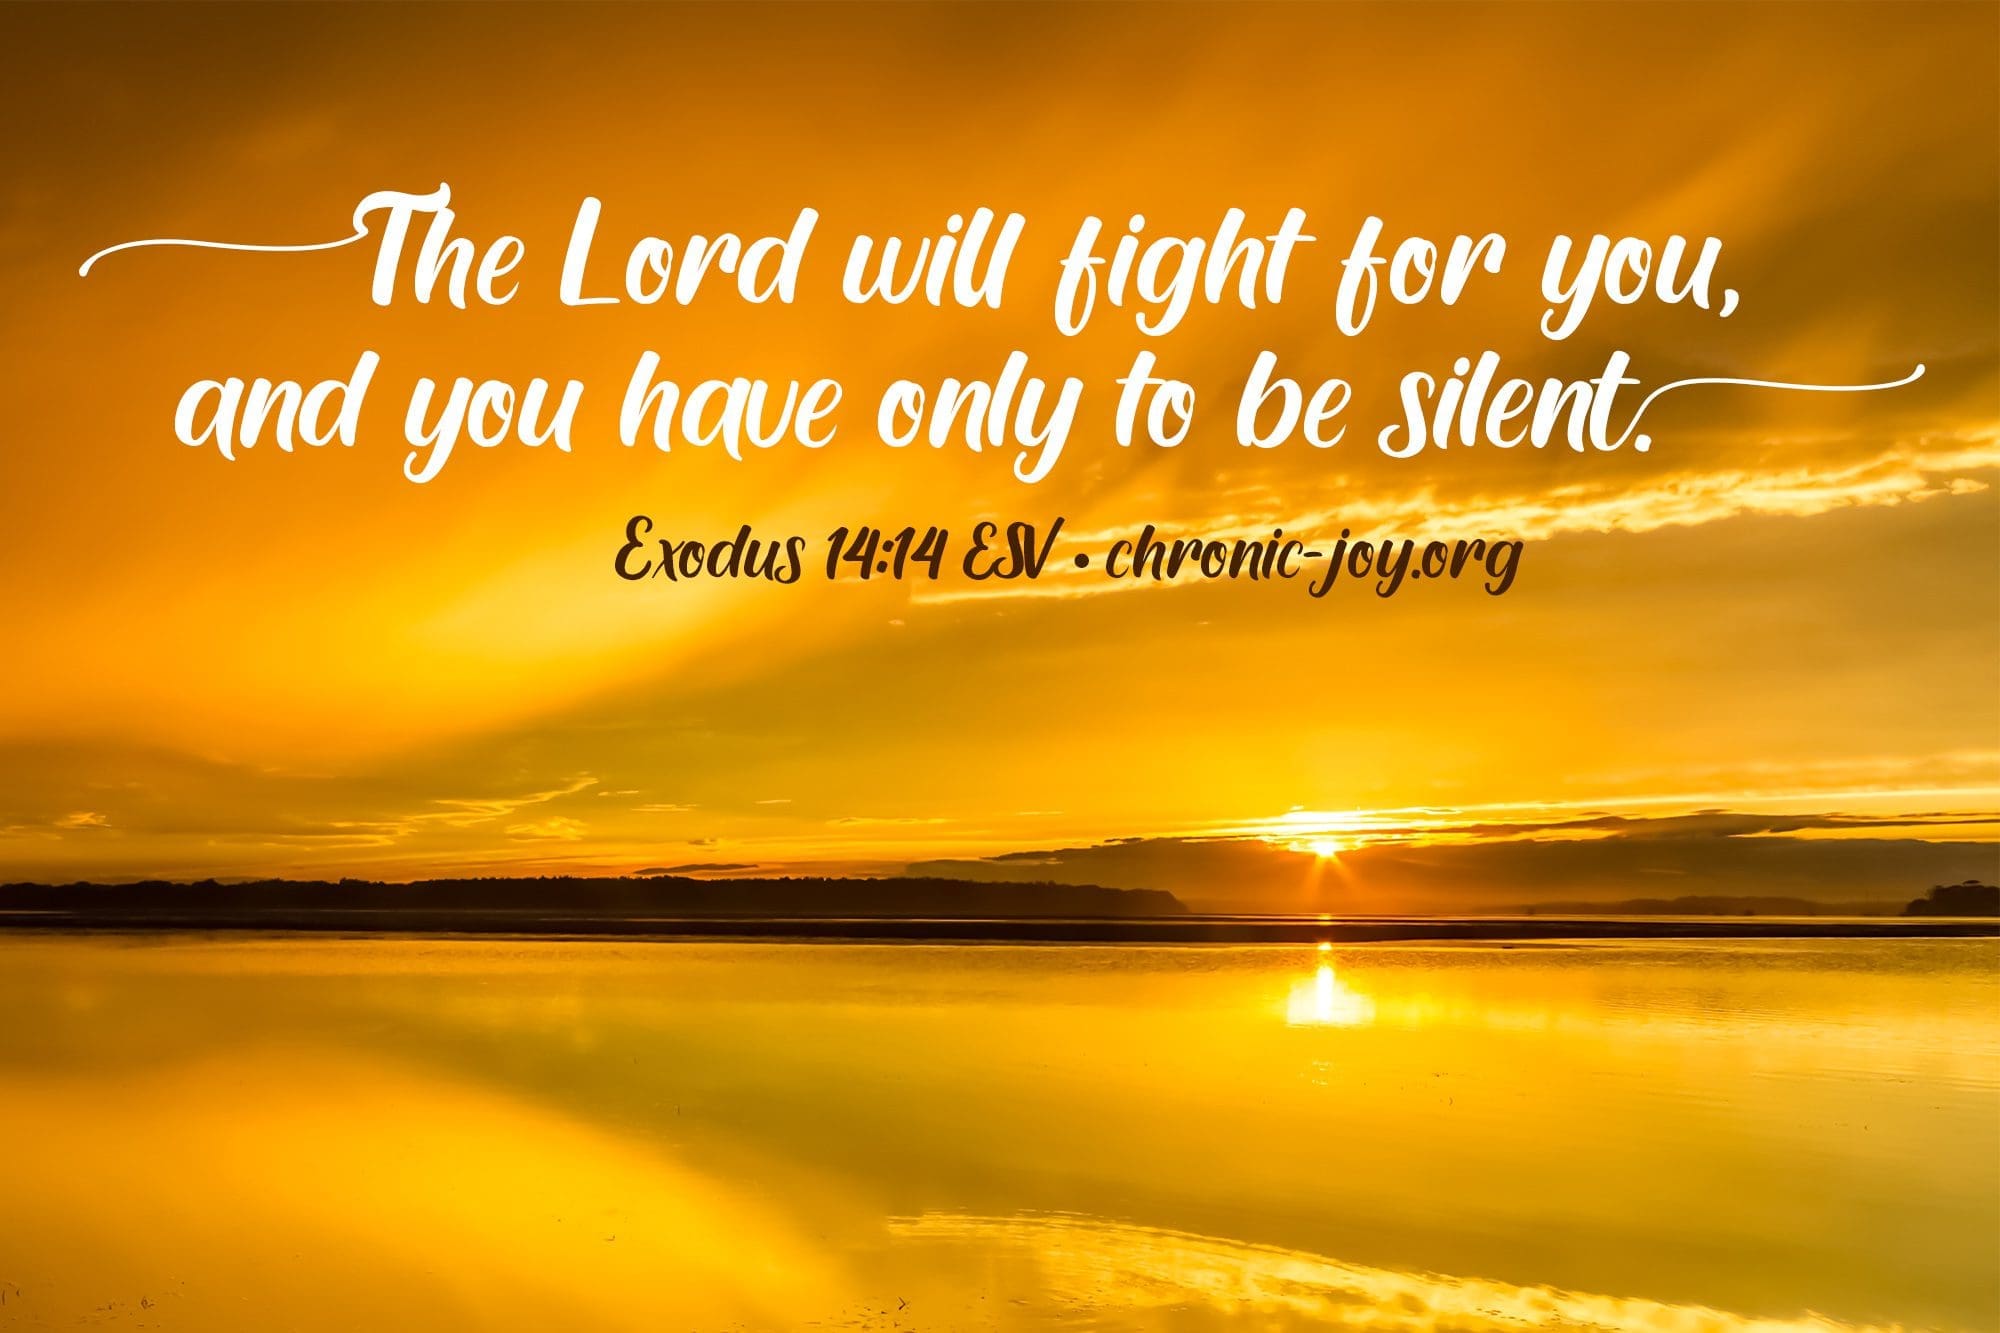 "The Lord will fight for you, and you have only to be silent." Exodus 14:14 ESV